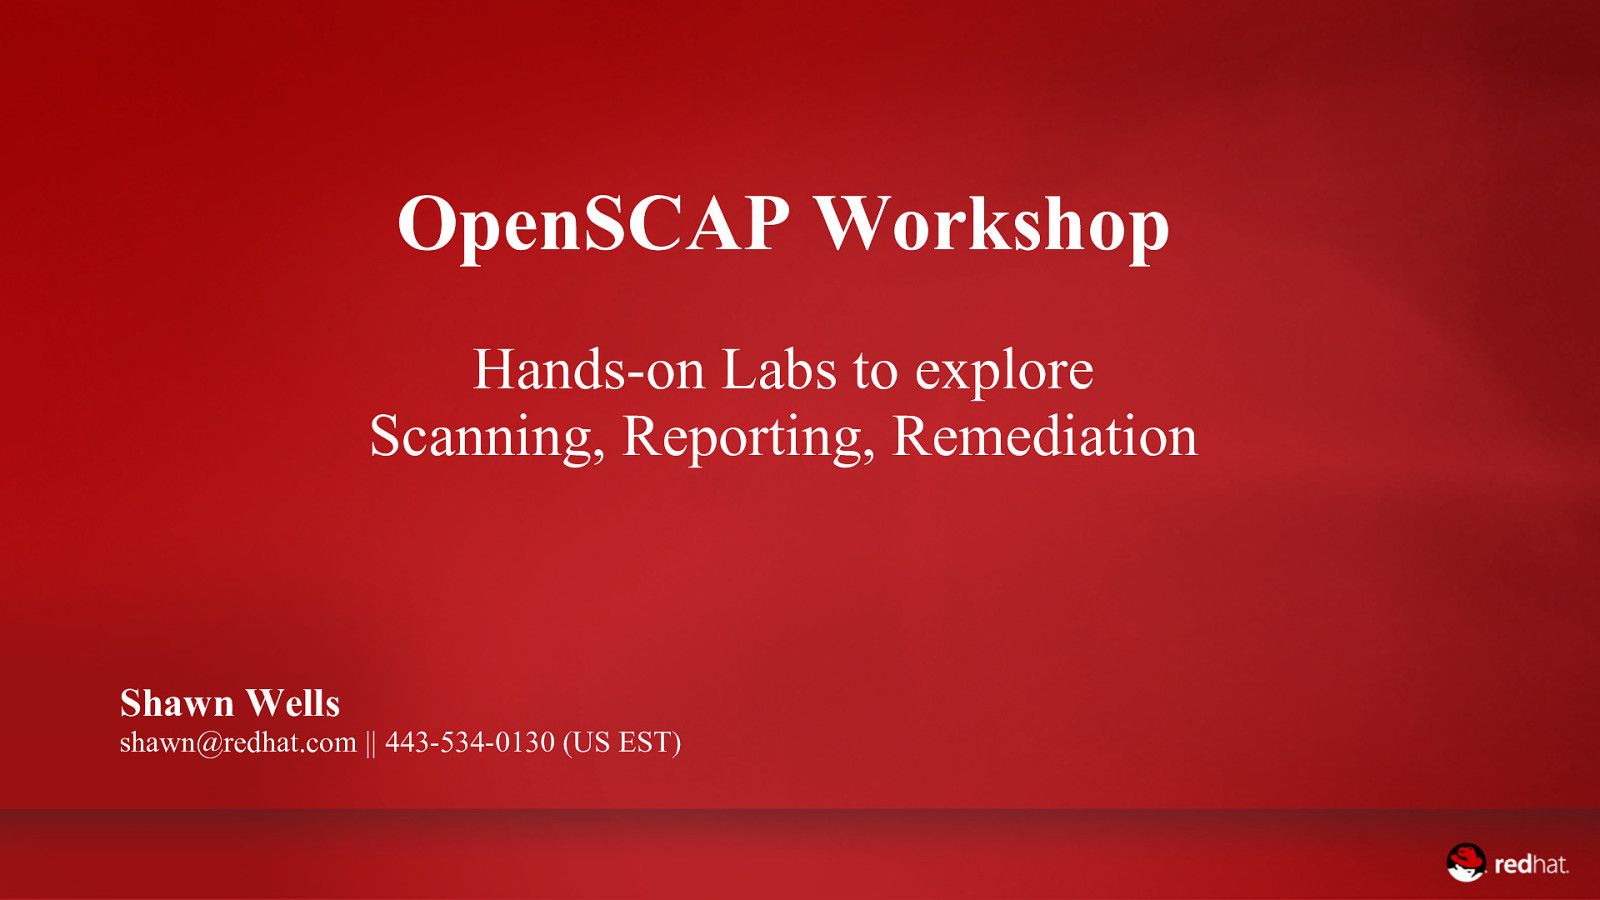 OpenSCAP Workshop: Hands-on Labs to explore Scanning, Reporting, Remediation